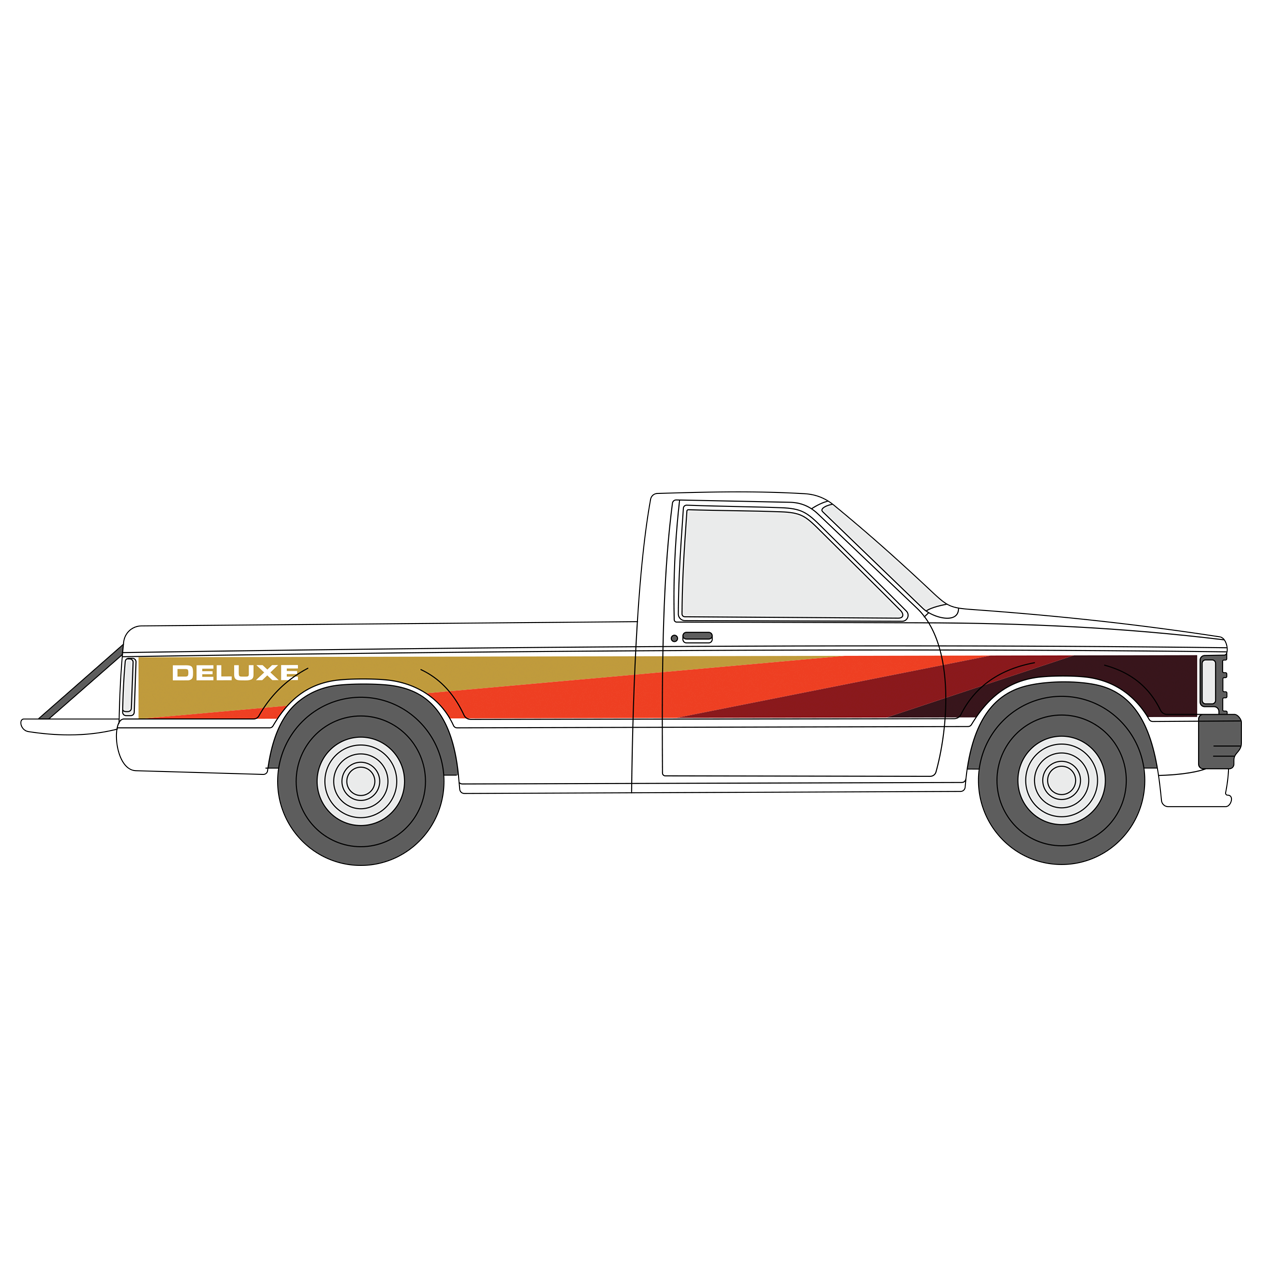 Chevy C10/S10 Deluxe Decal